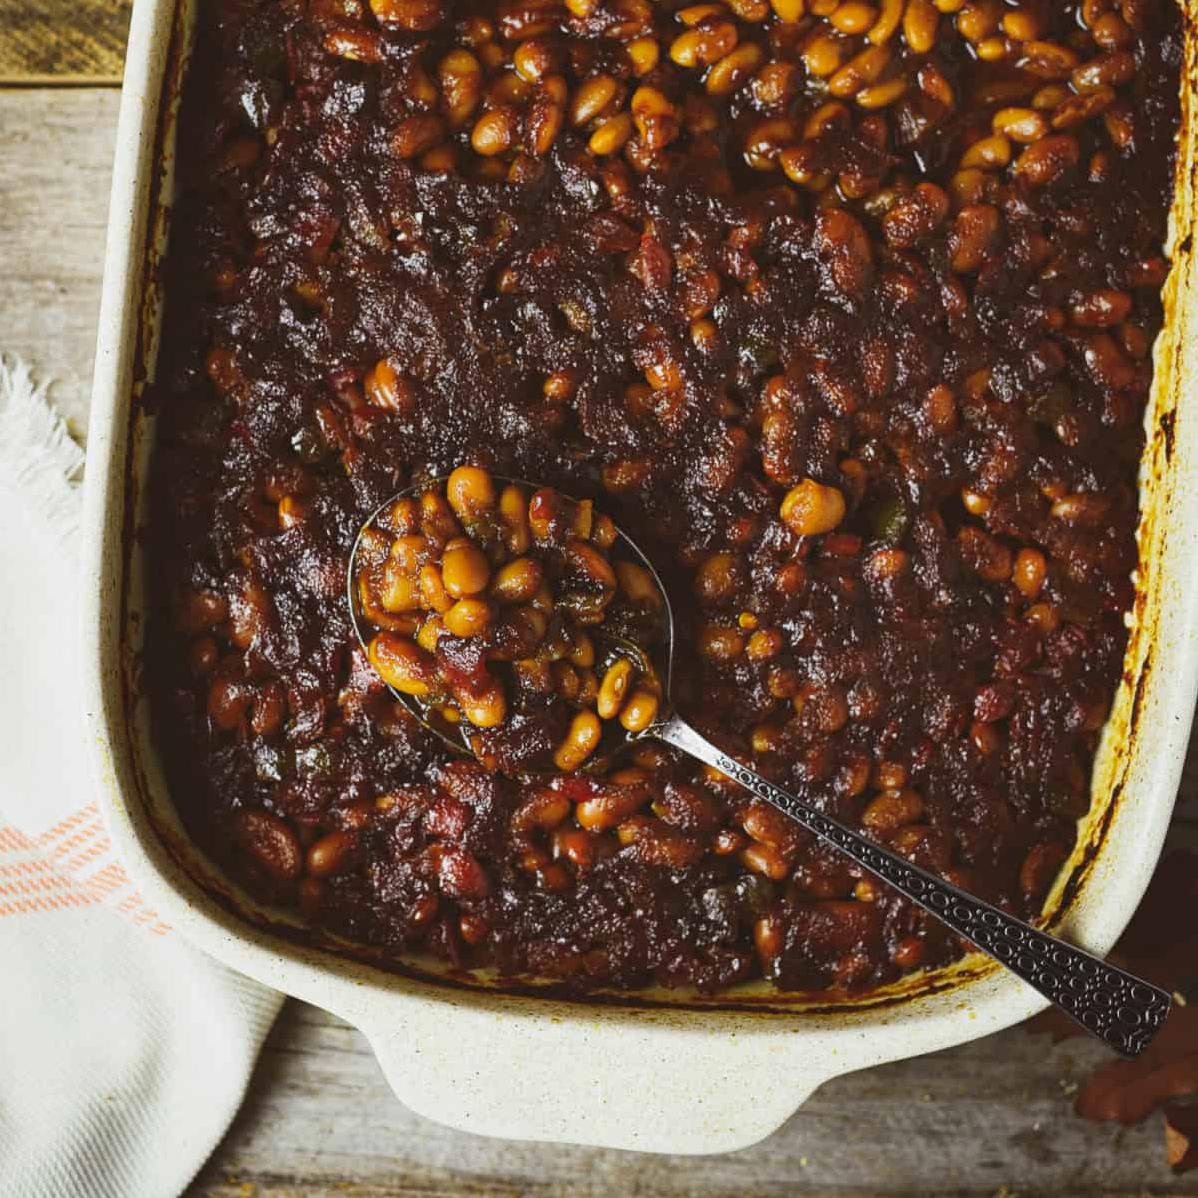  A bowl of these baked beans will warm your soul.